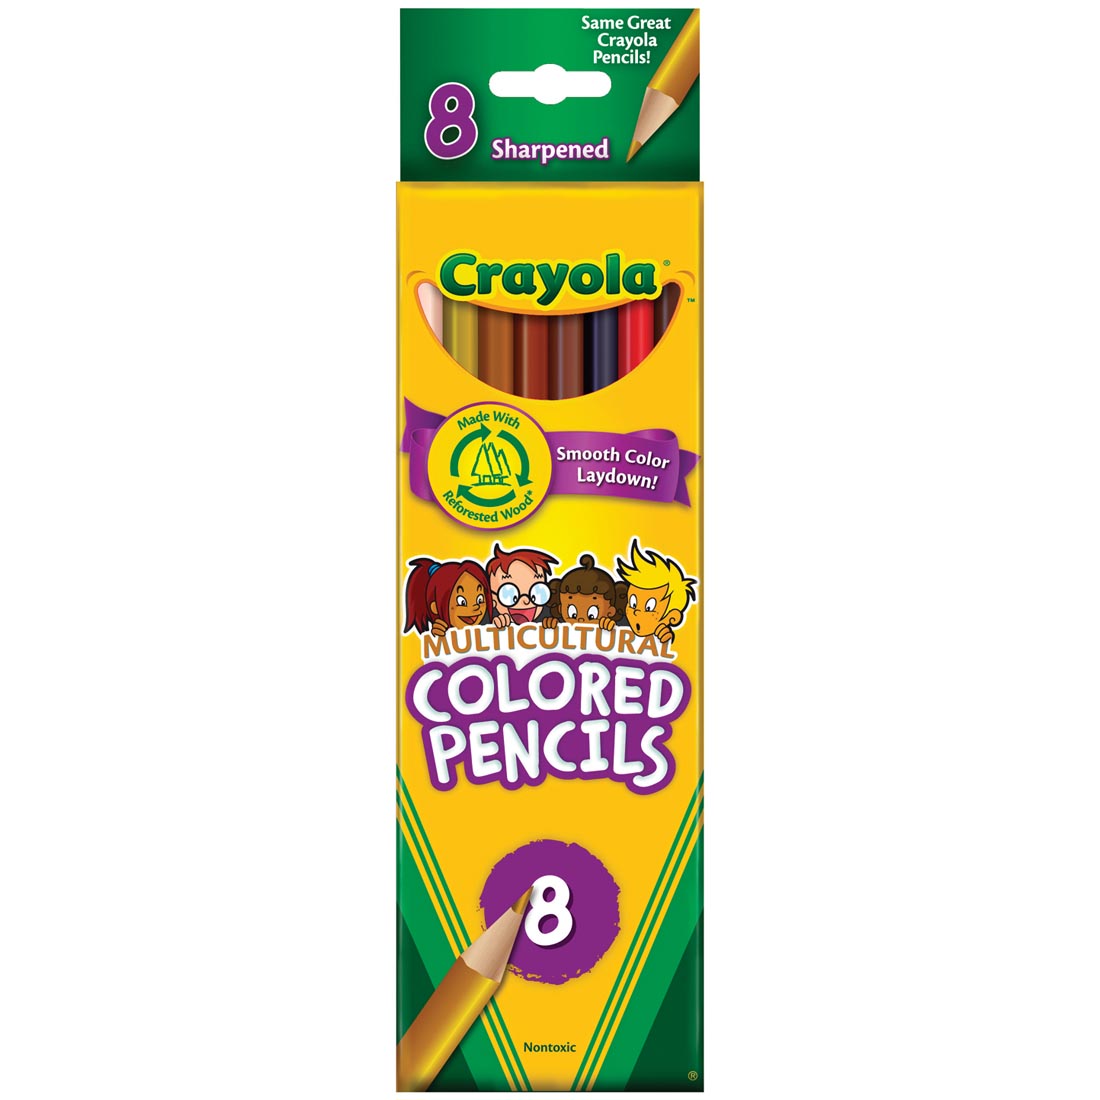 Crayola Multicultural Colored Pencils, Assorted Skin Tones, Set of 8 - image 1 of 6